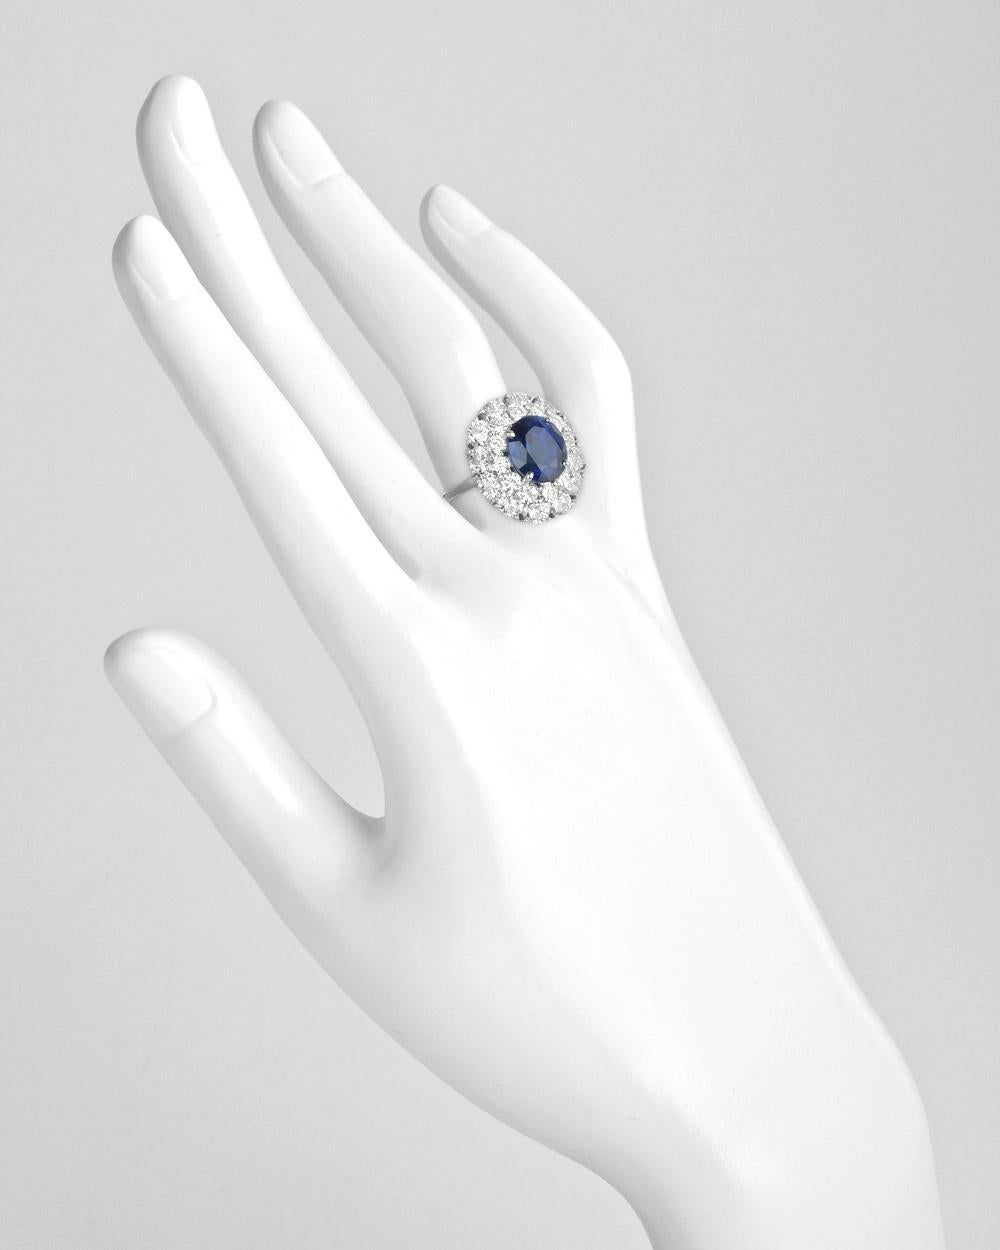 Burmese sapphire and diamond cluster ring, centering an oval-shaped 